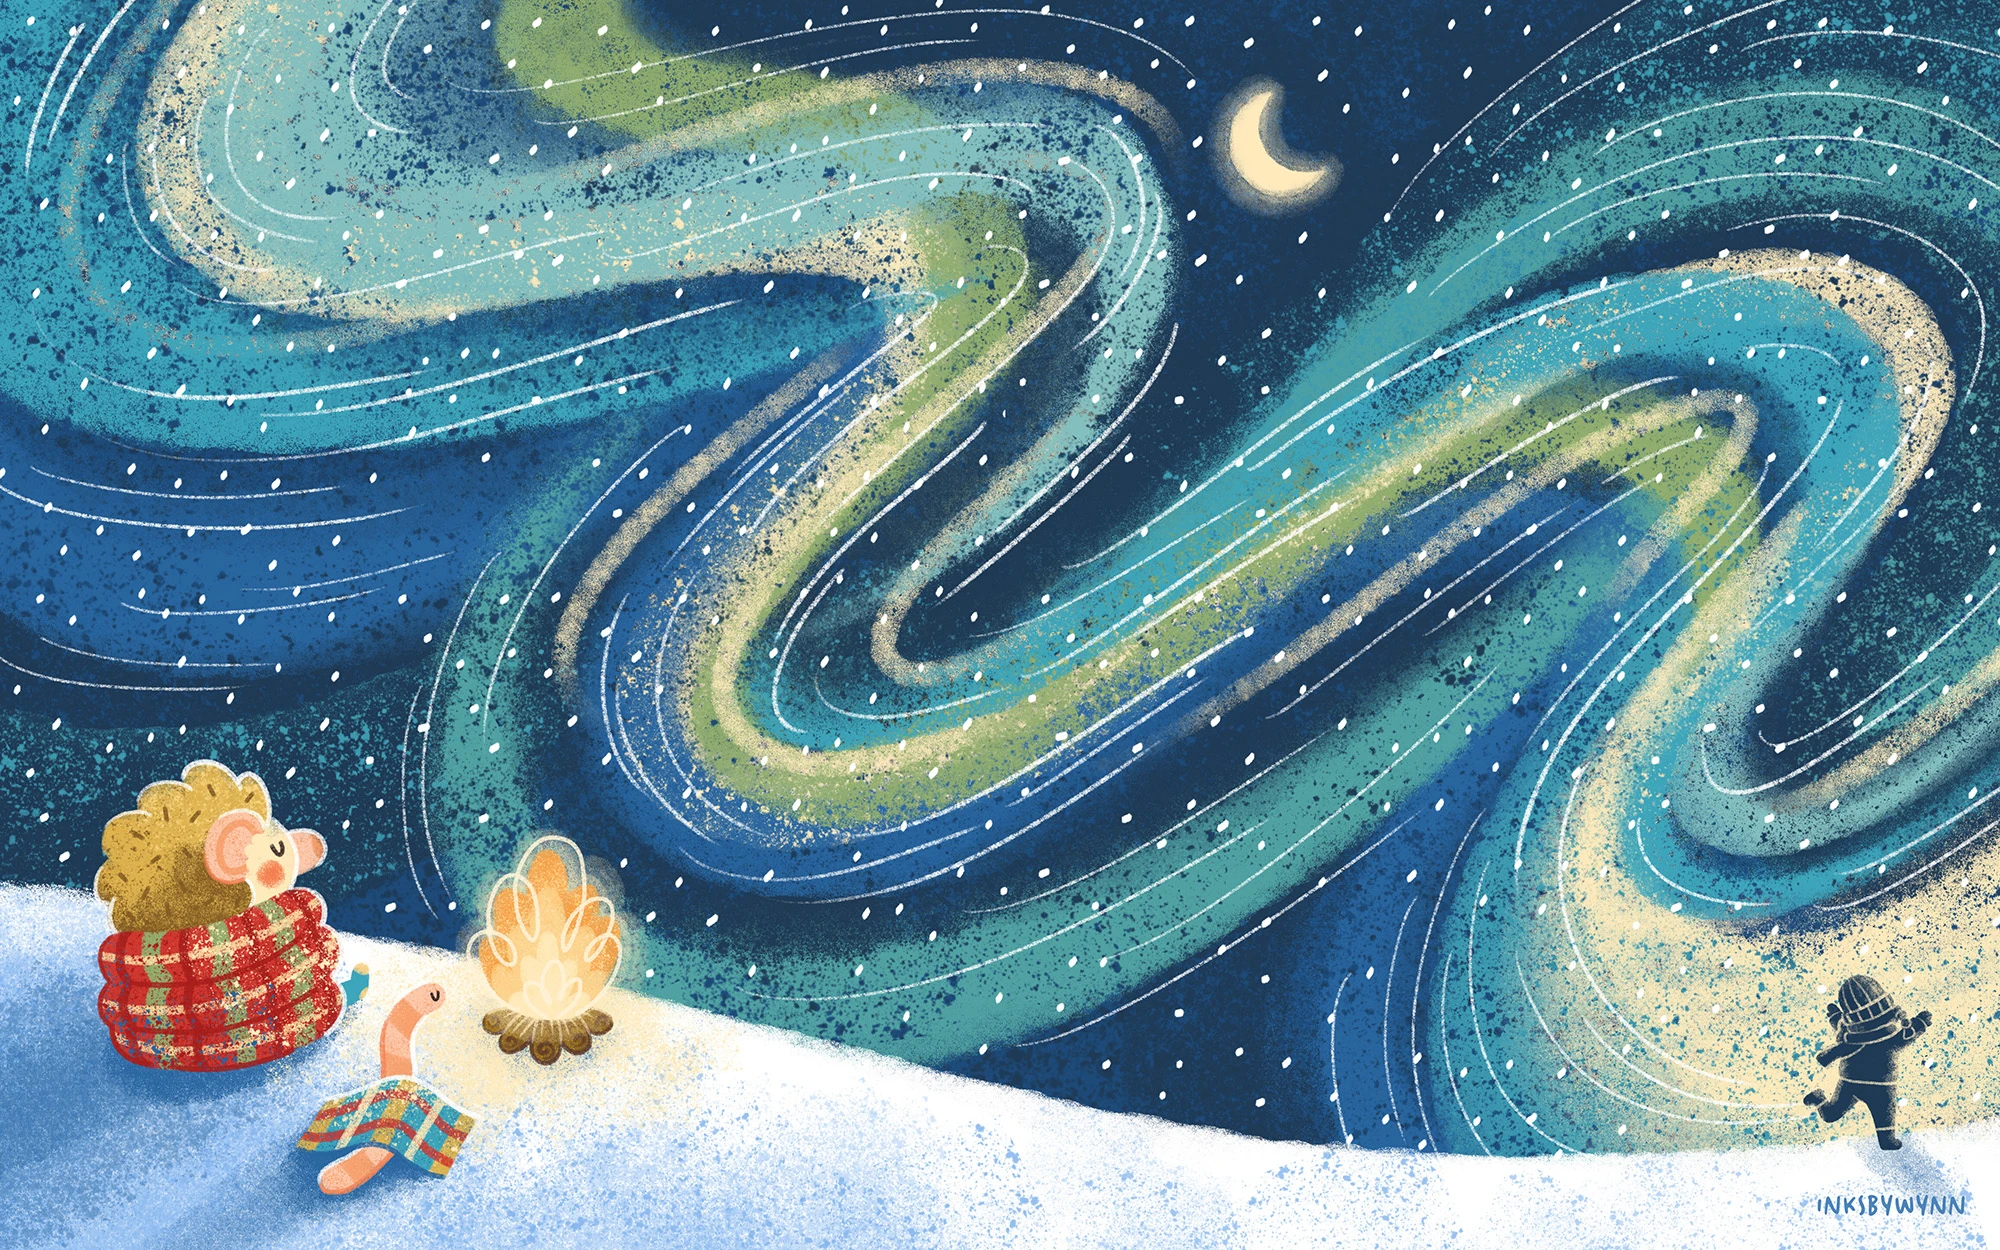 An illustration of a hedgehog and worm snuggling under a cozy blanket next to a campfire as a little girl frolics in the distance under a vast sky of northern lights and blowing snow